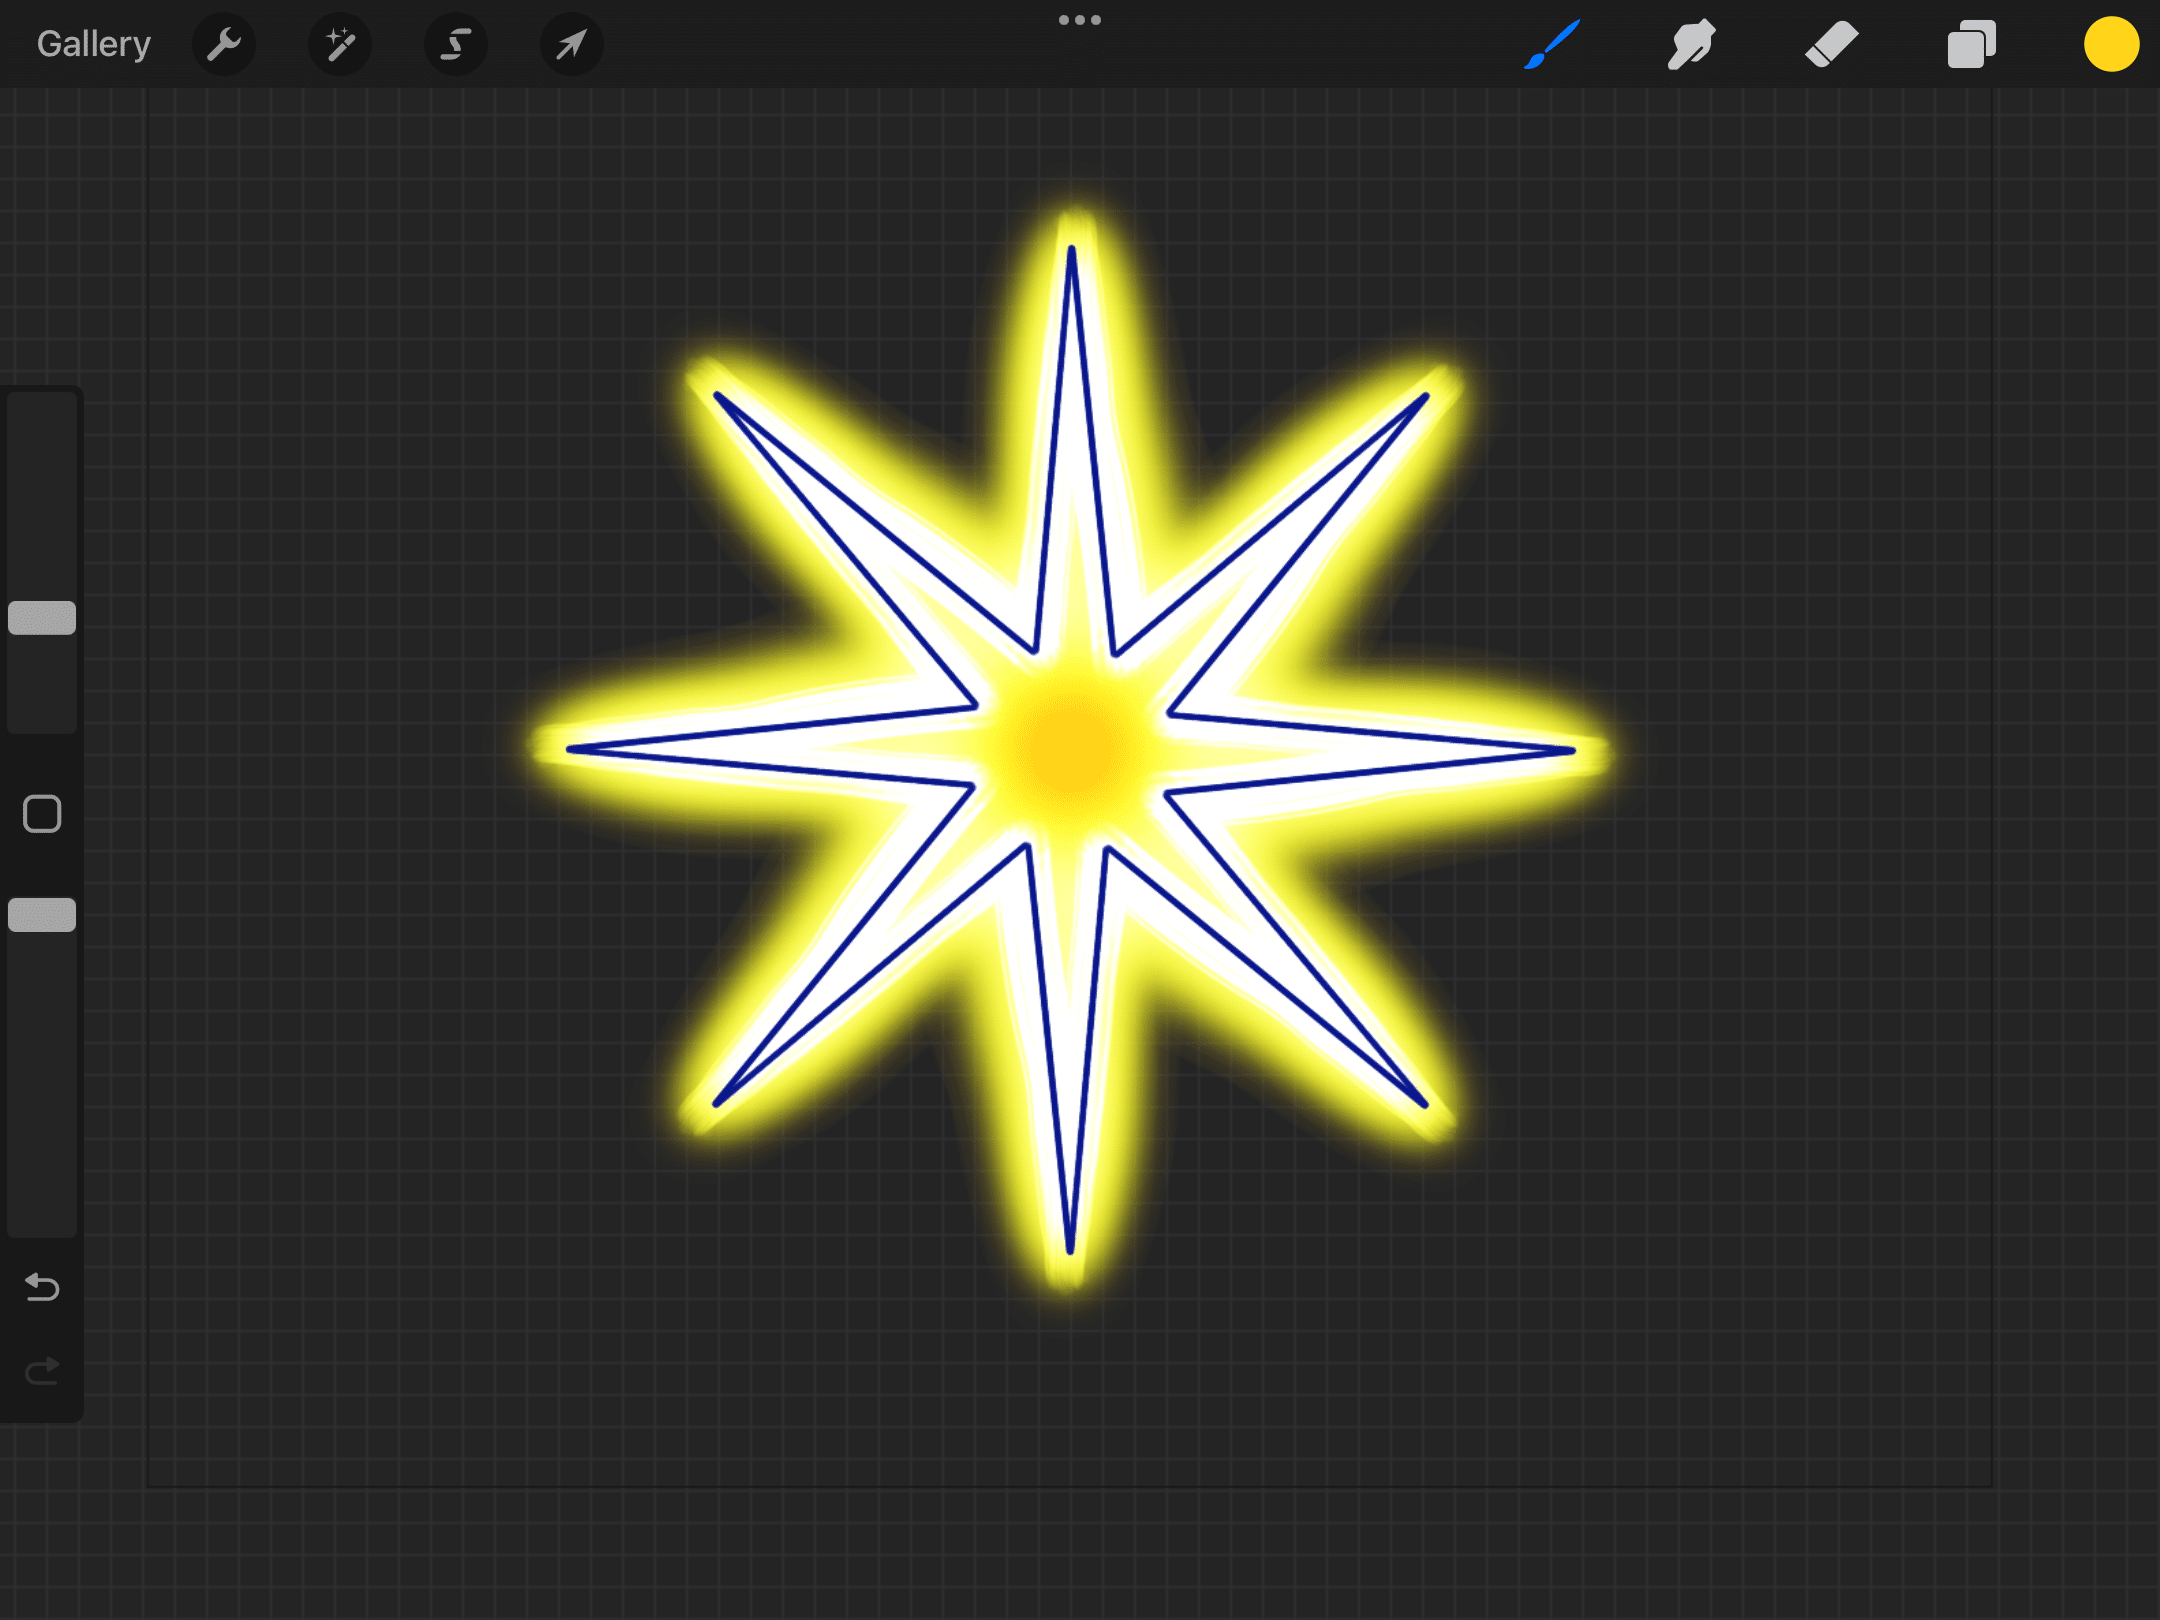 How to Draw a Perfect Symmetrical Star in Procreate